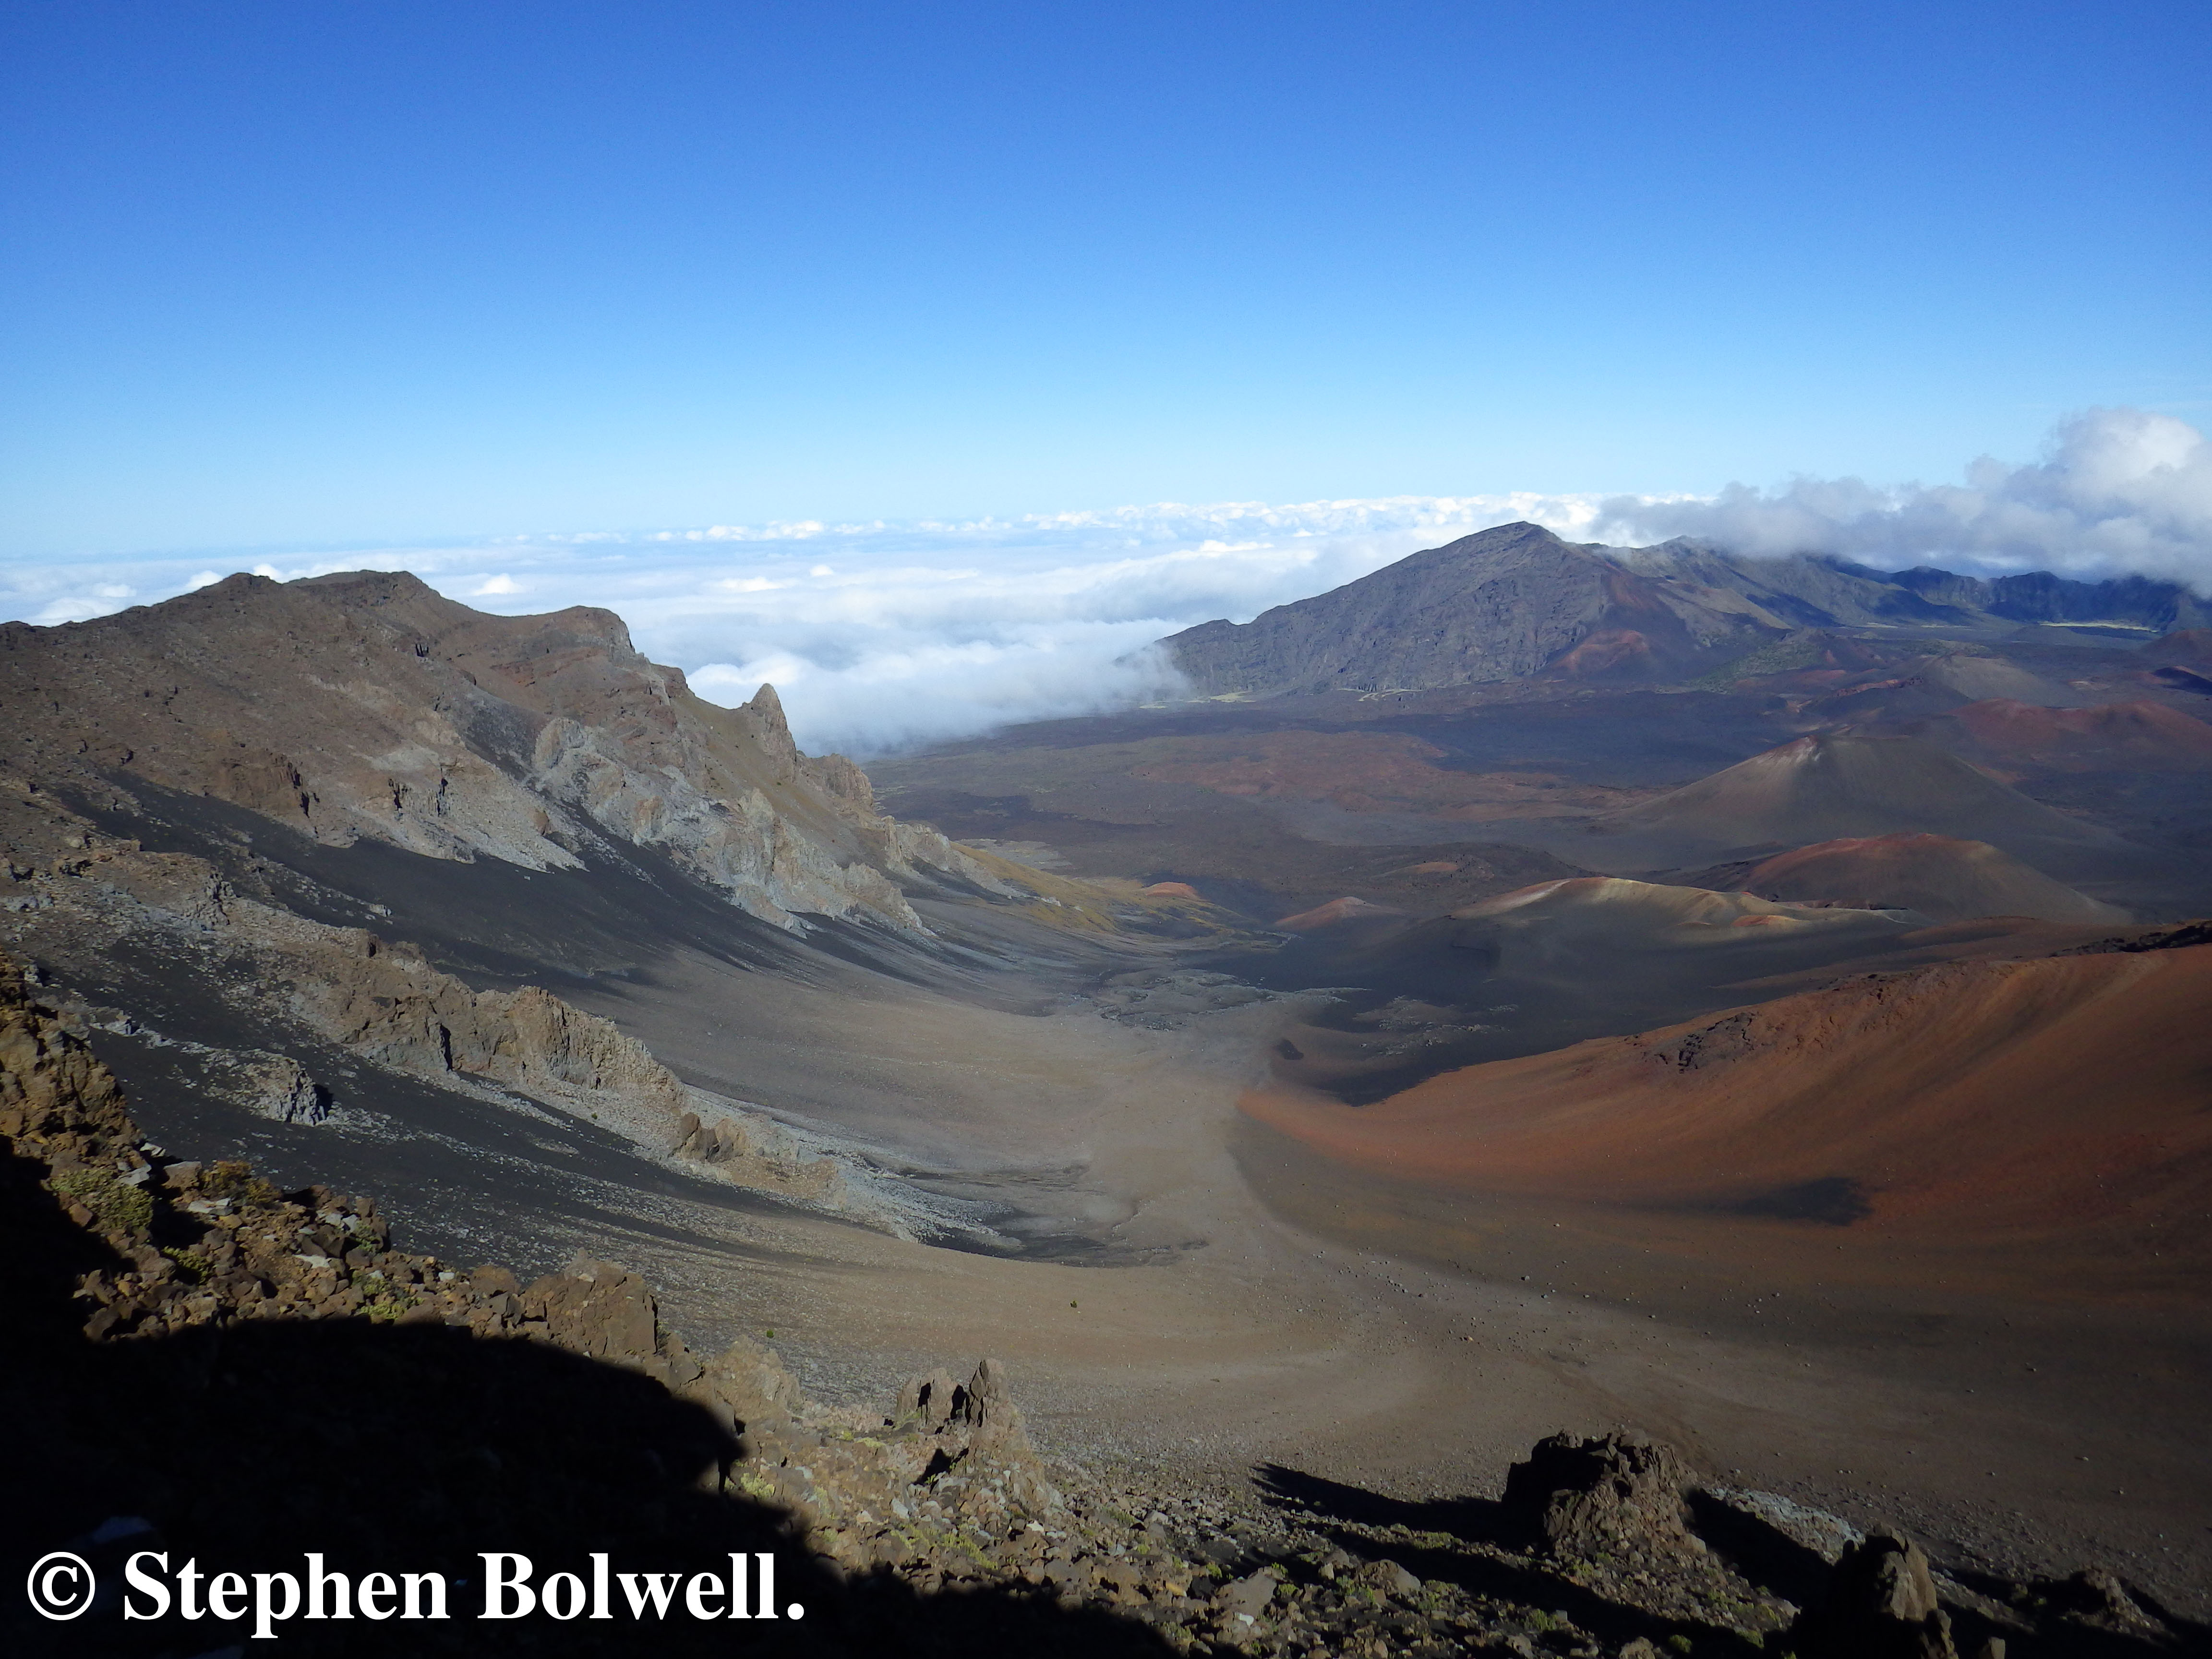 At the top of Haleakala the landscape is hardly a tropical paradise, but it is enchanting.